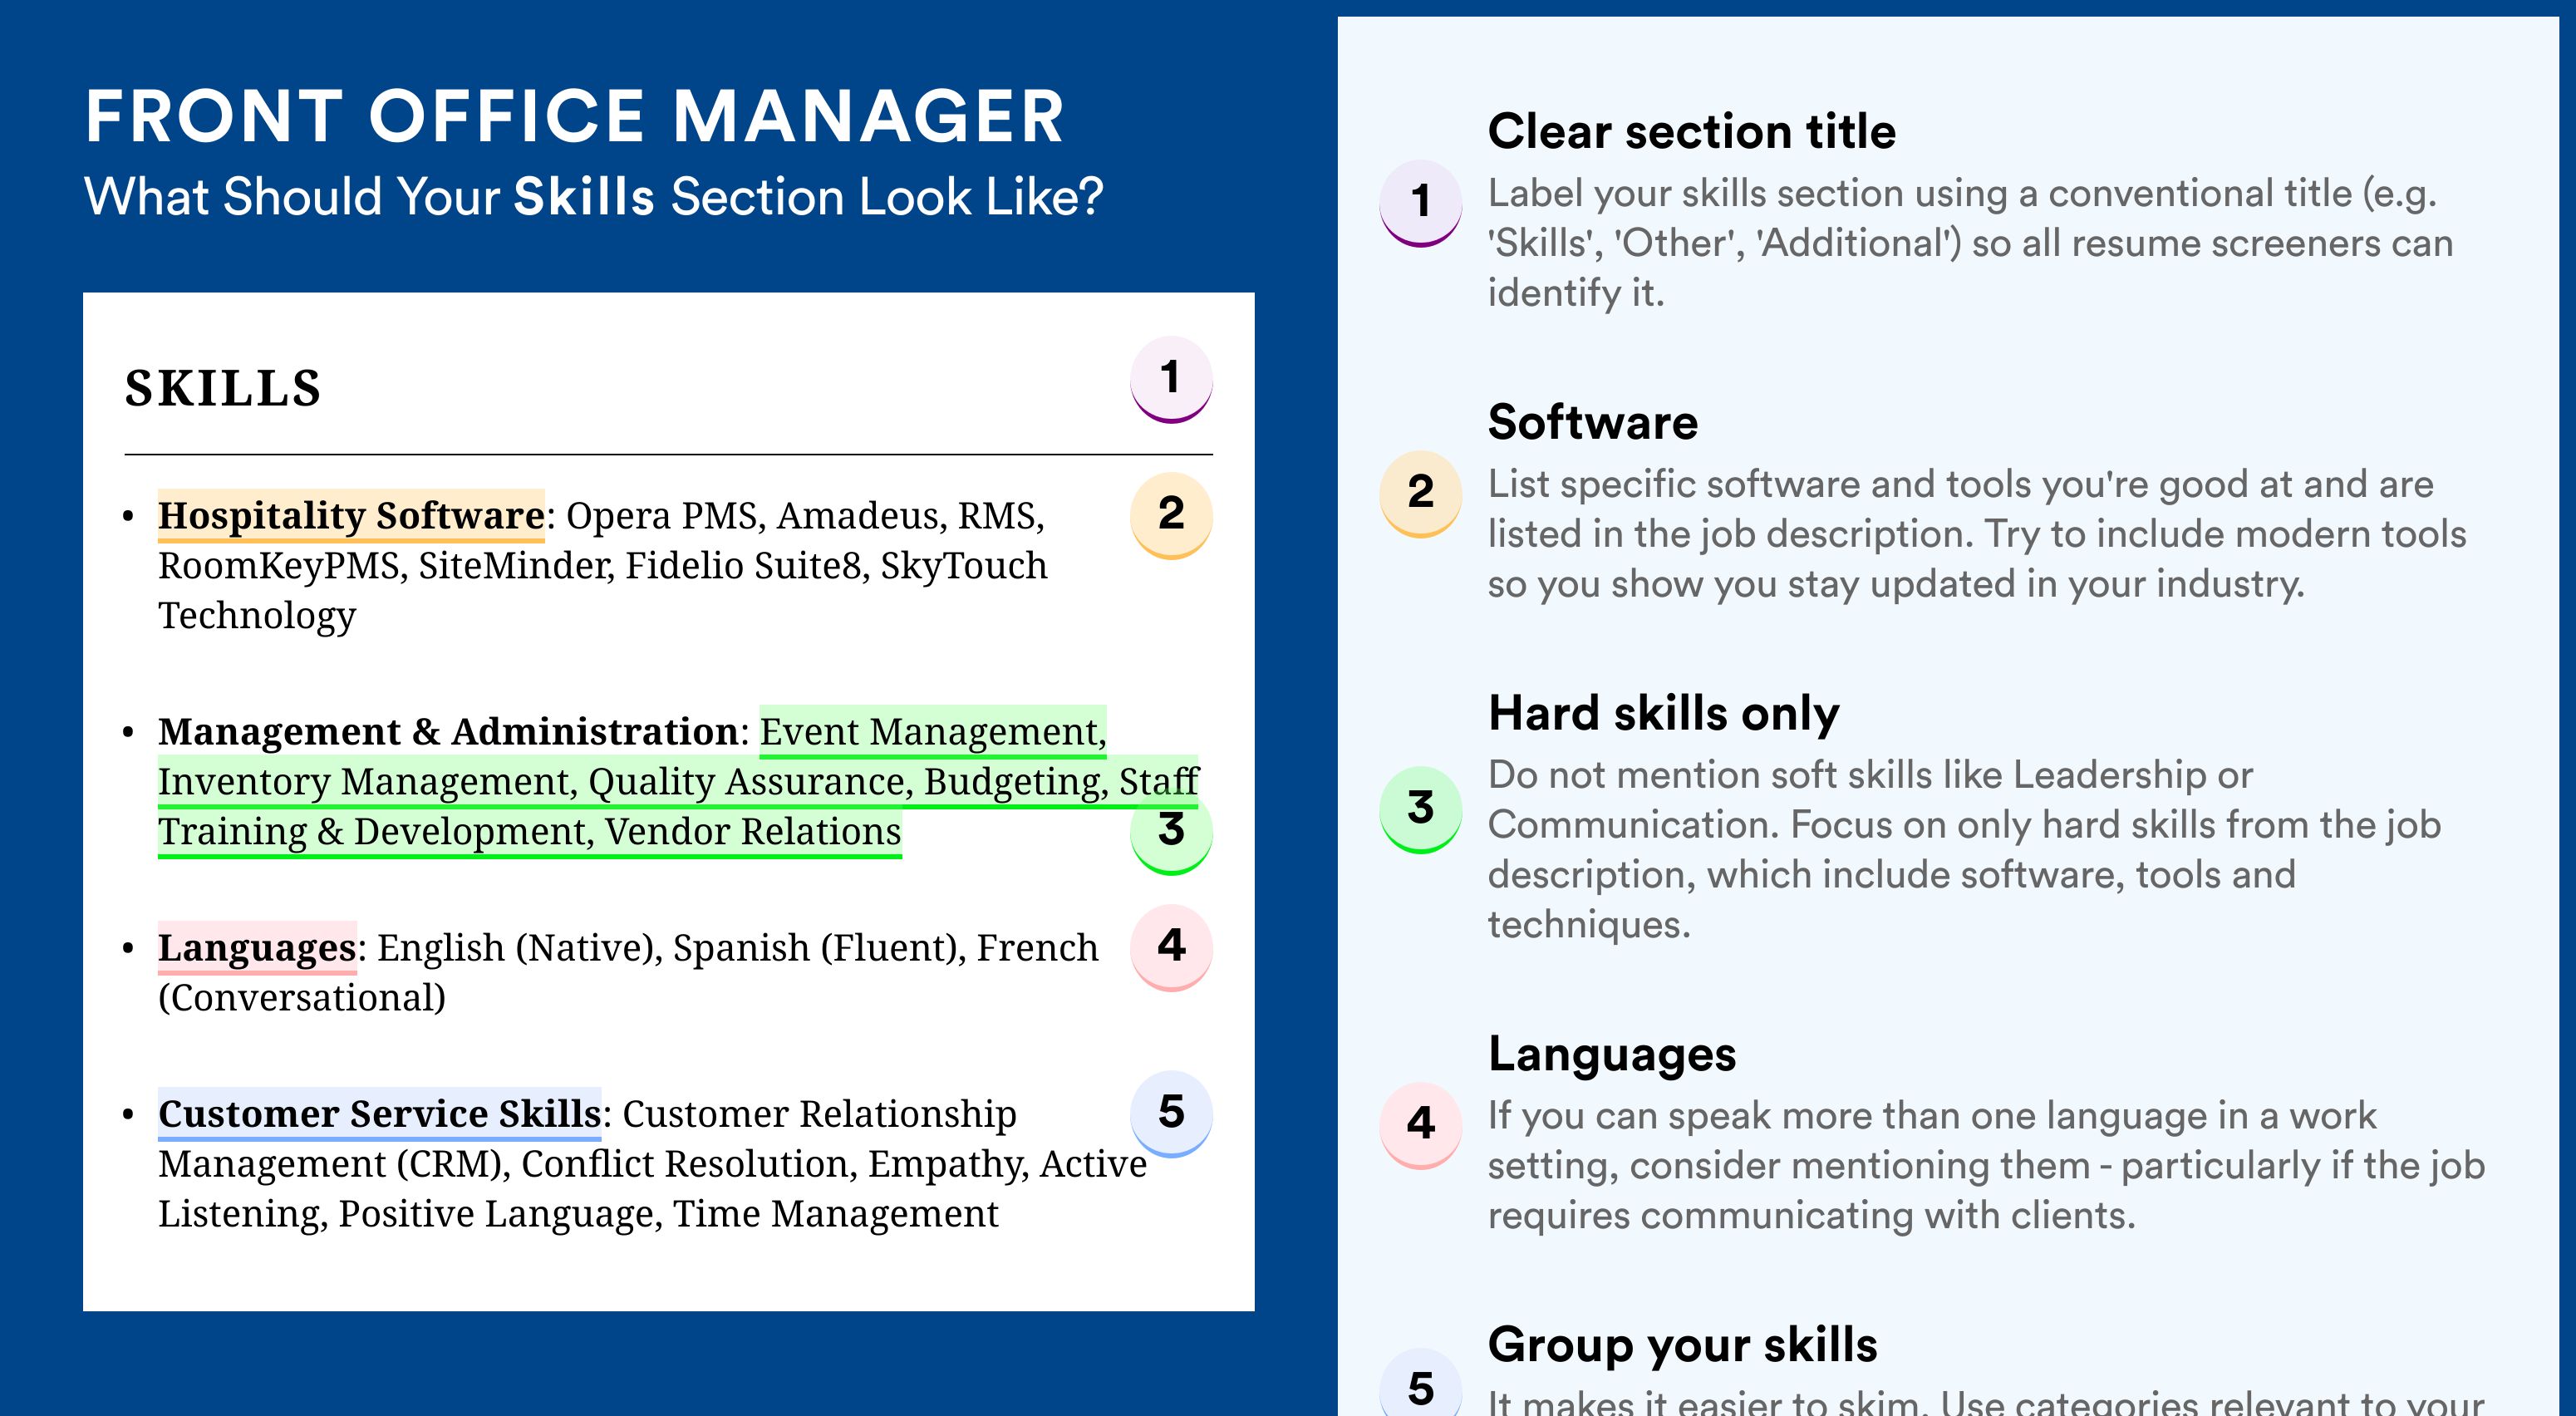 How To Write Your Skills Section - Front Office Manager Roles